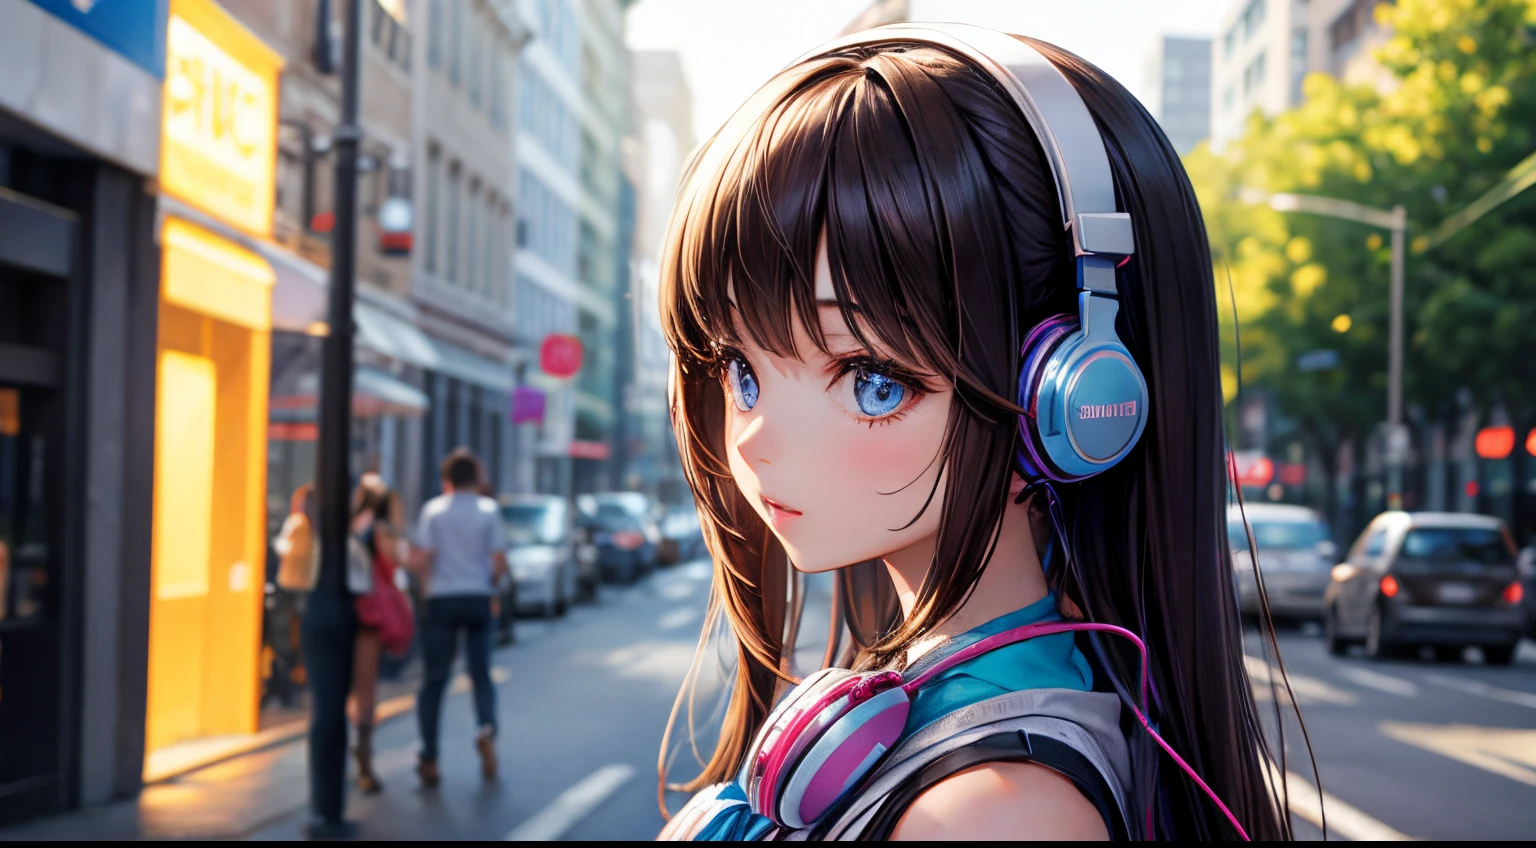 Pretty brunette girl listening to music with headphones